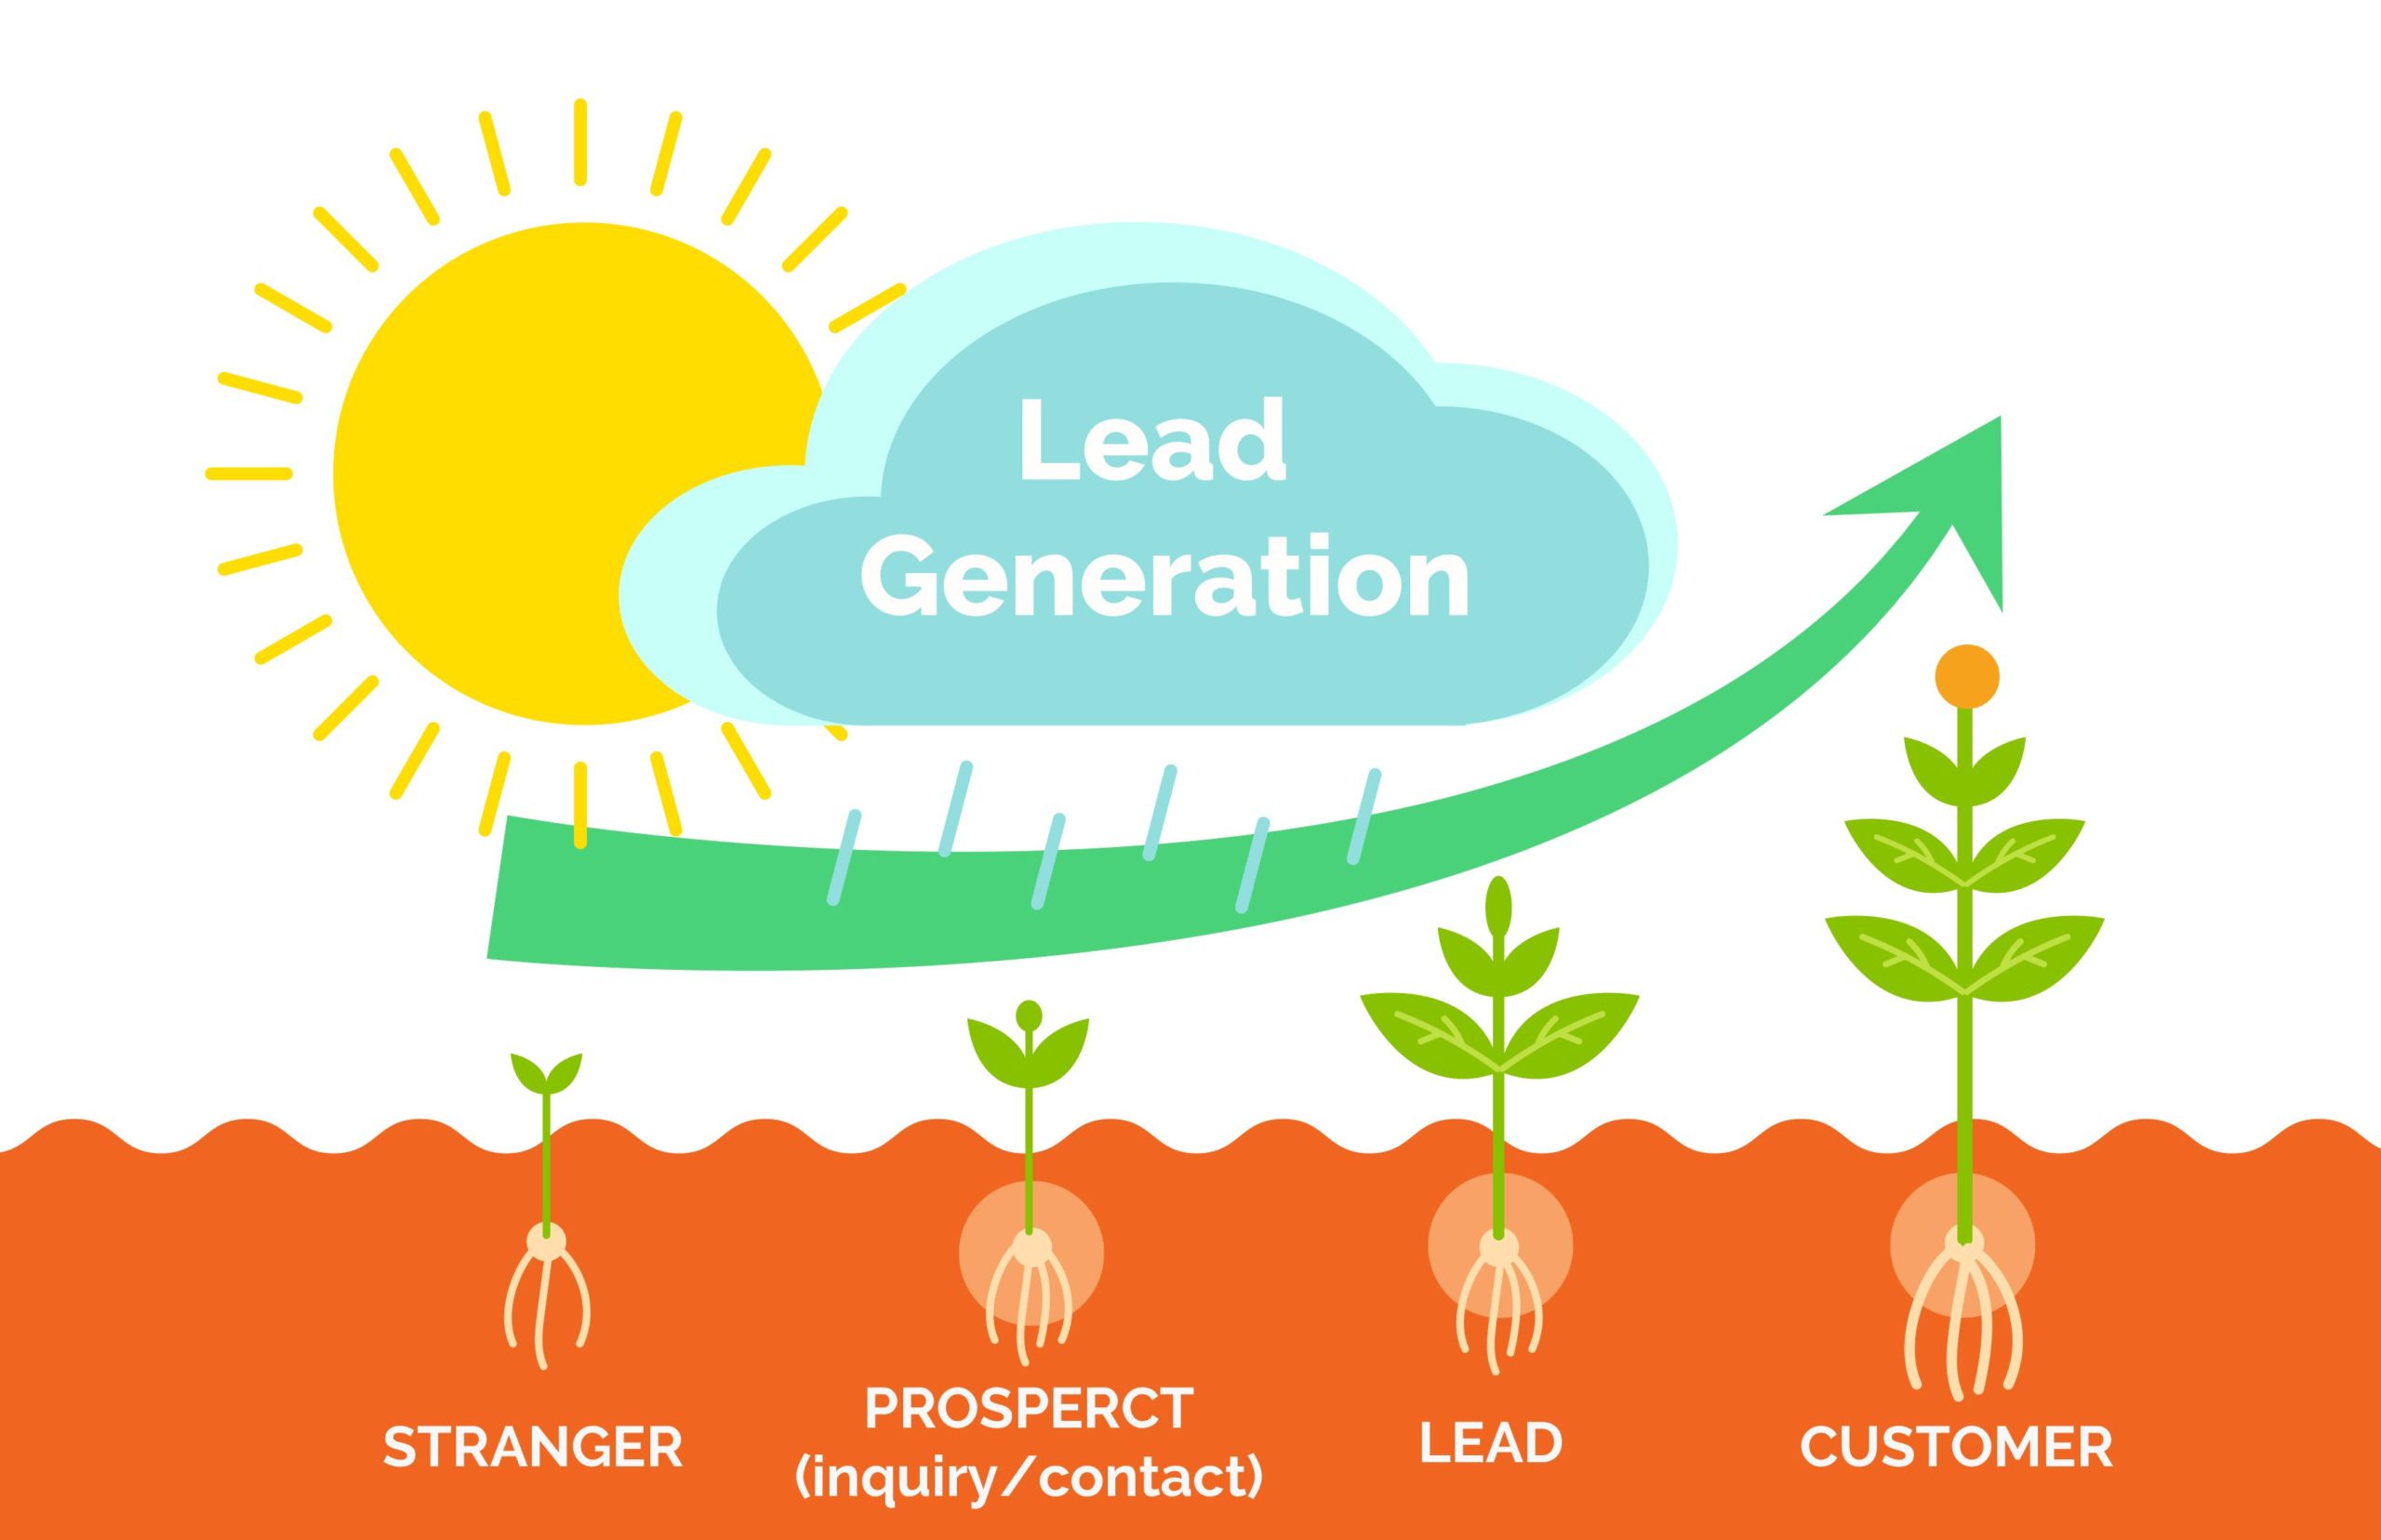 Lead Generation for Business